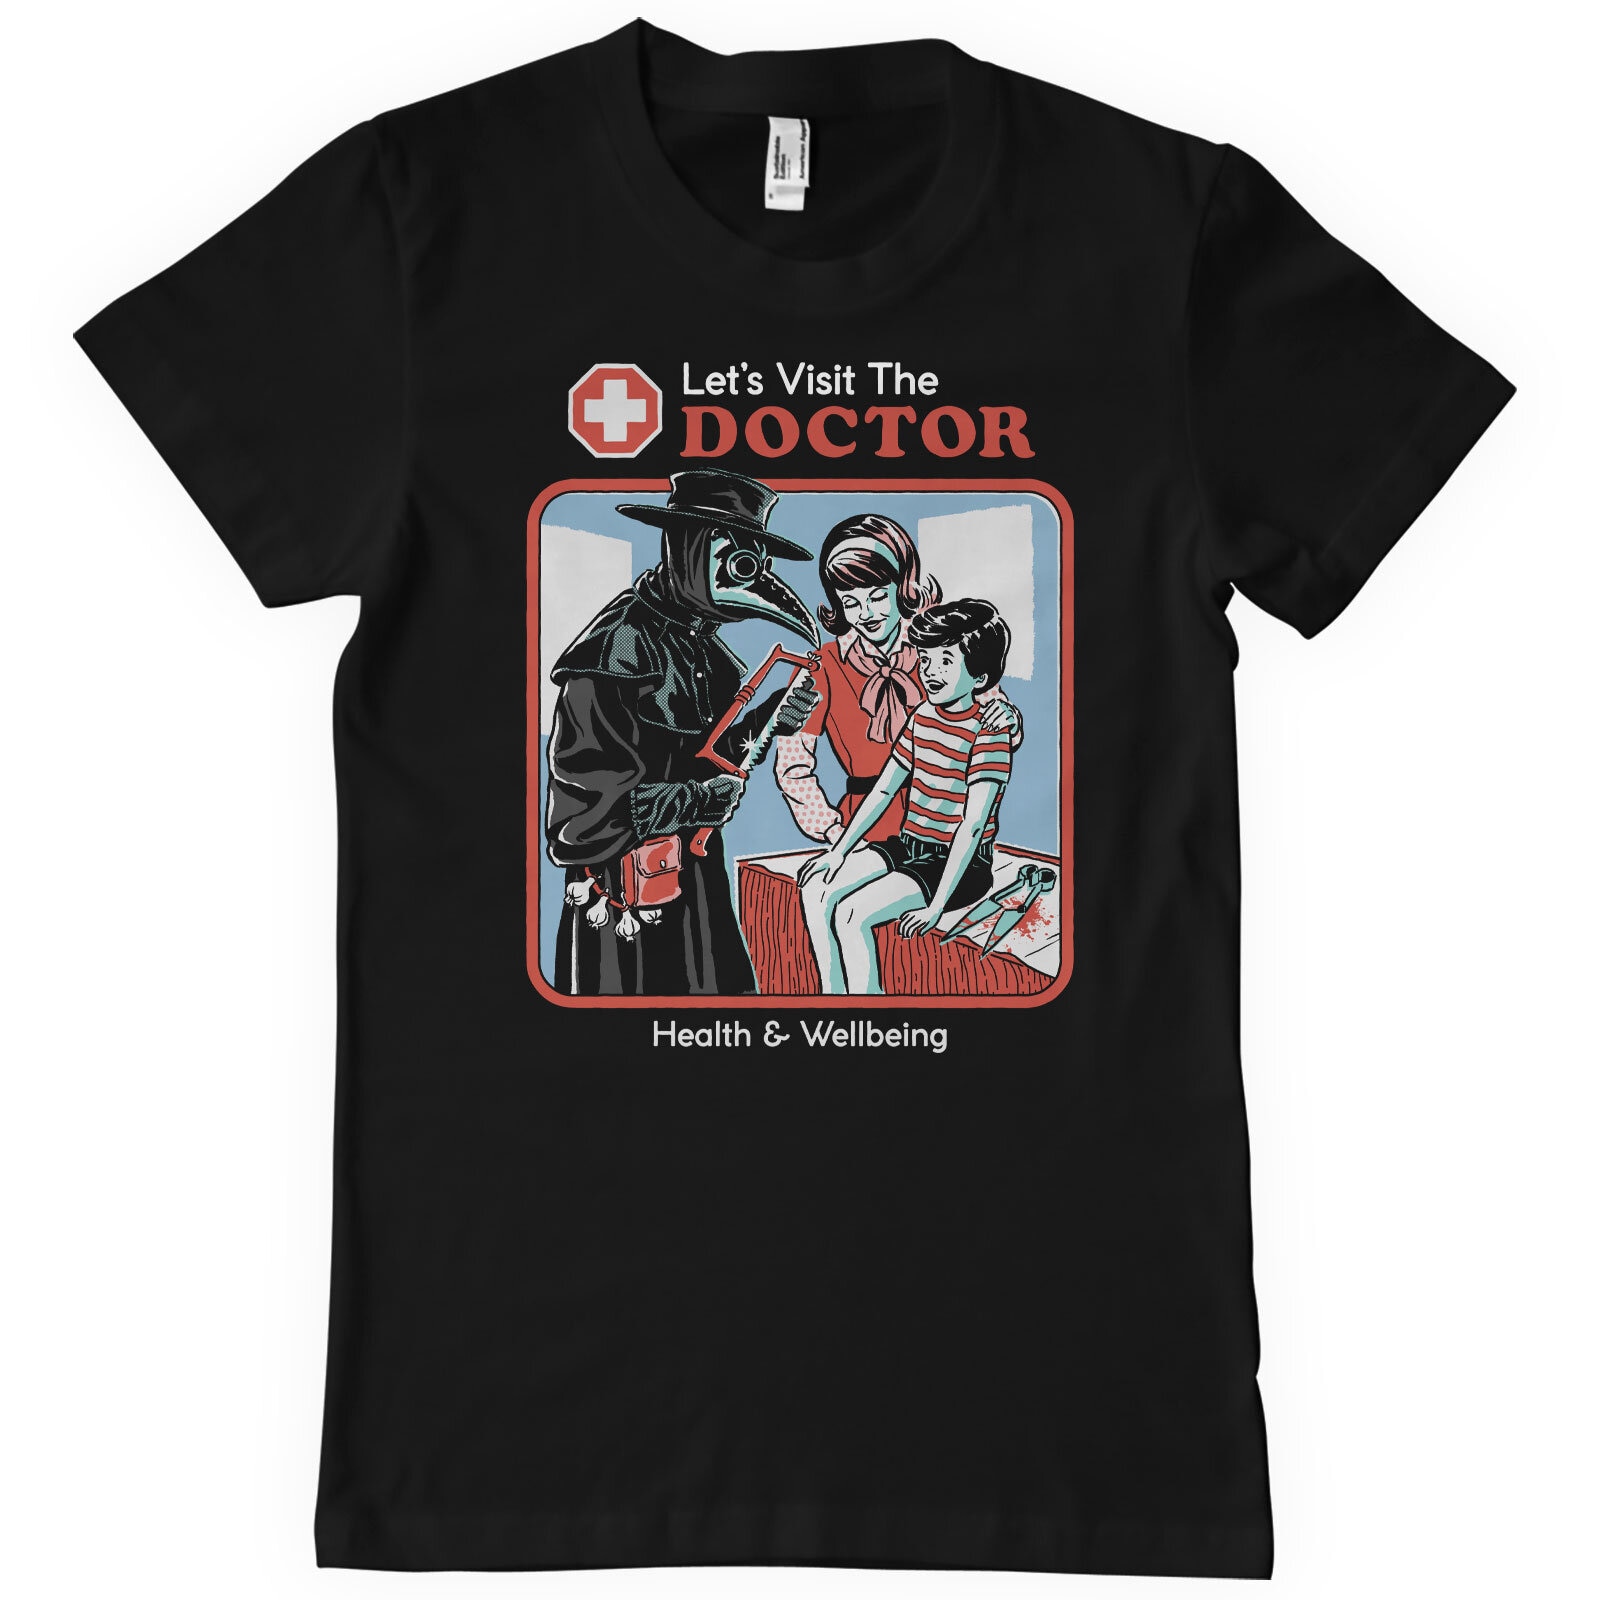 Let's Visit The Doctor T-Shirt